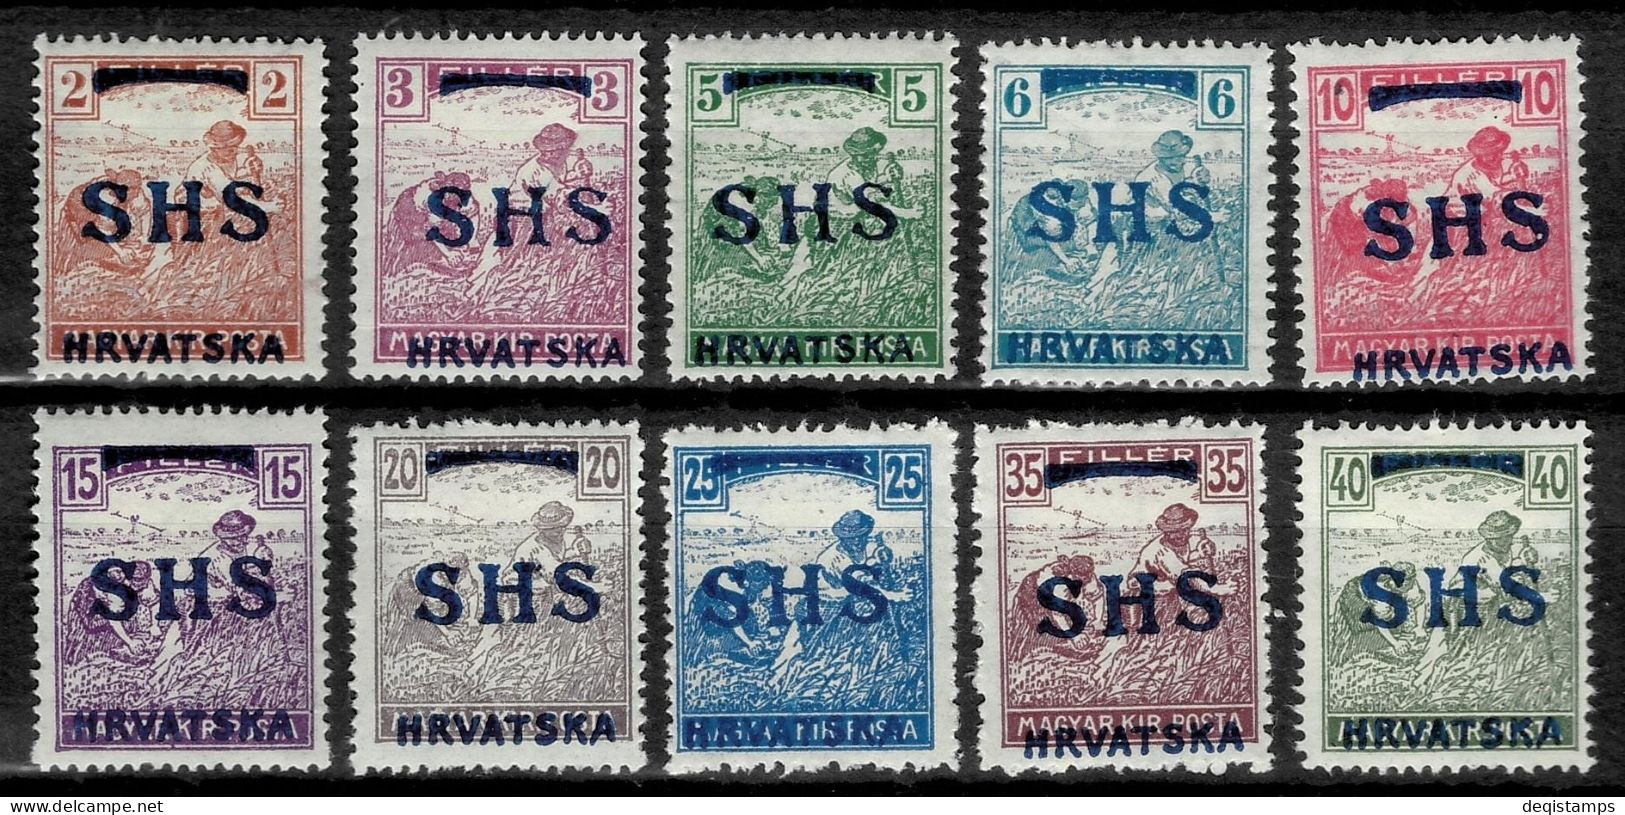 SHS - Croatia Stamps 1918 Set Hungary Postage MH Stamps Overprinted - Neufs